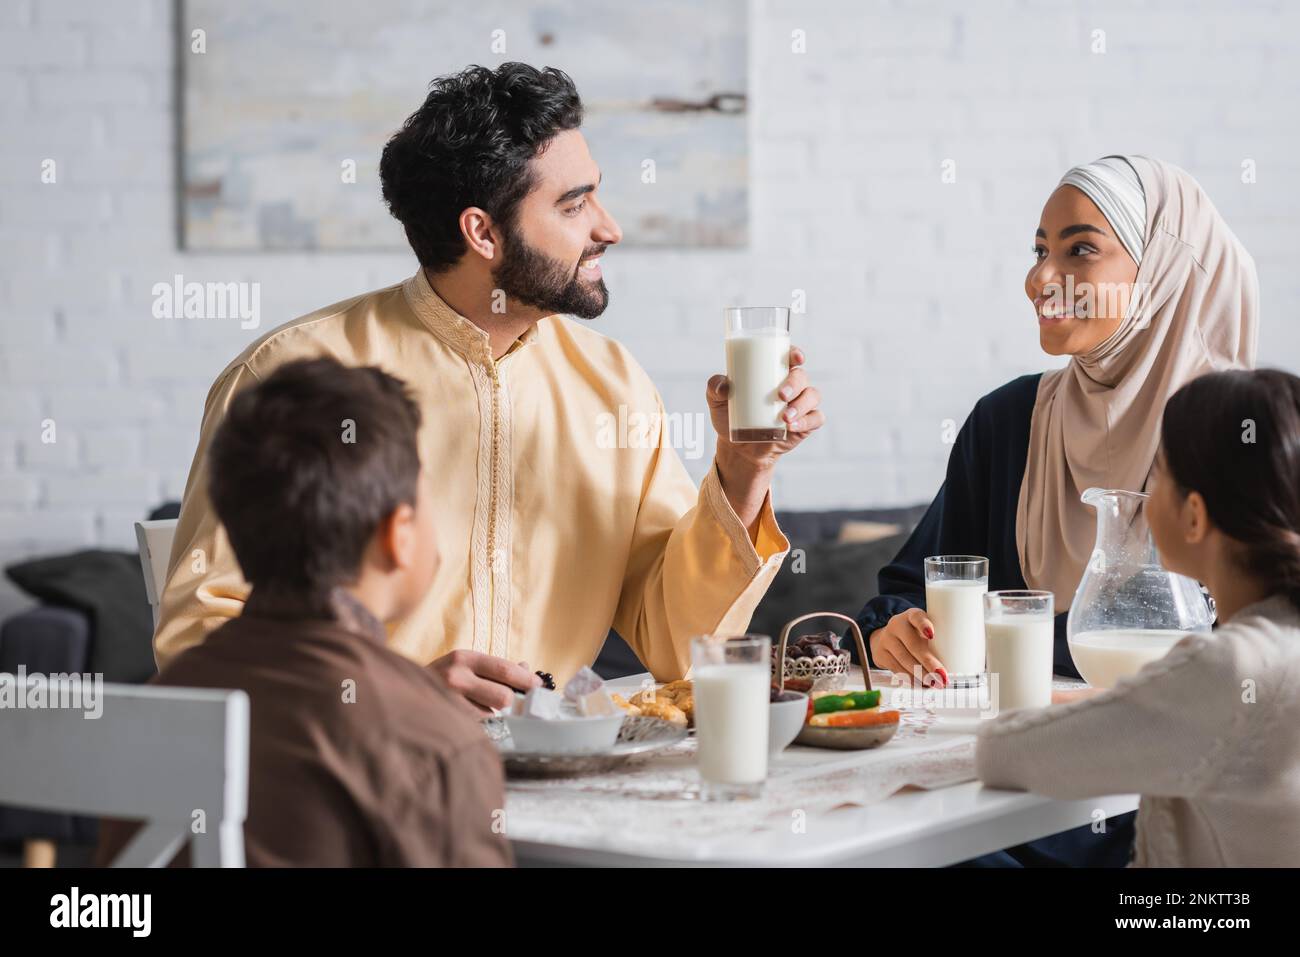 Smiling middle eastern family talking during ramadan breakfast at home,stock image Stock Photo